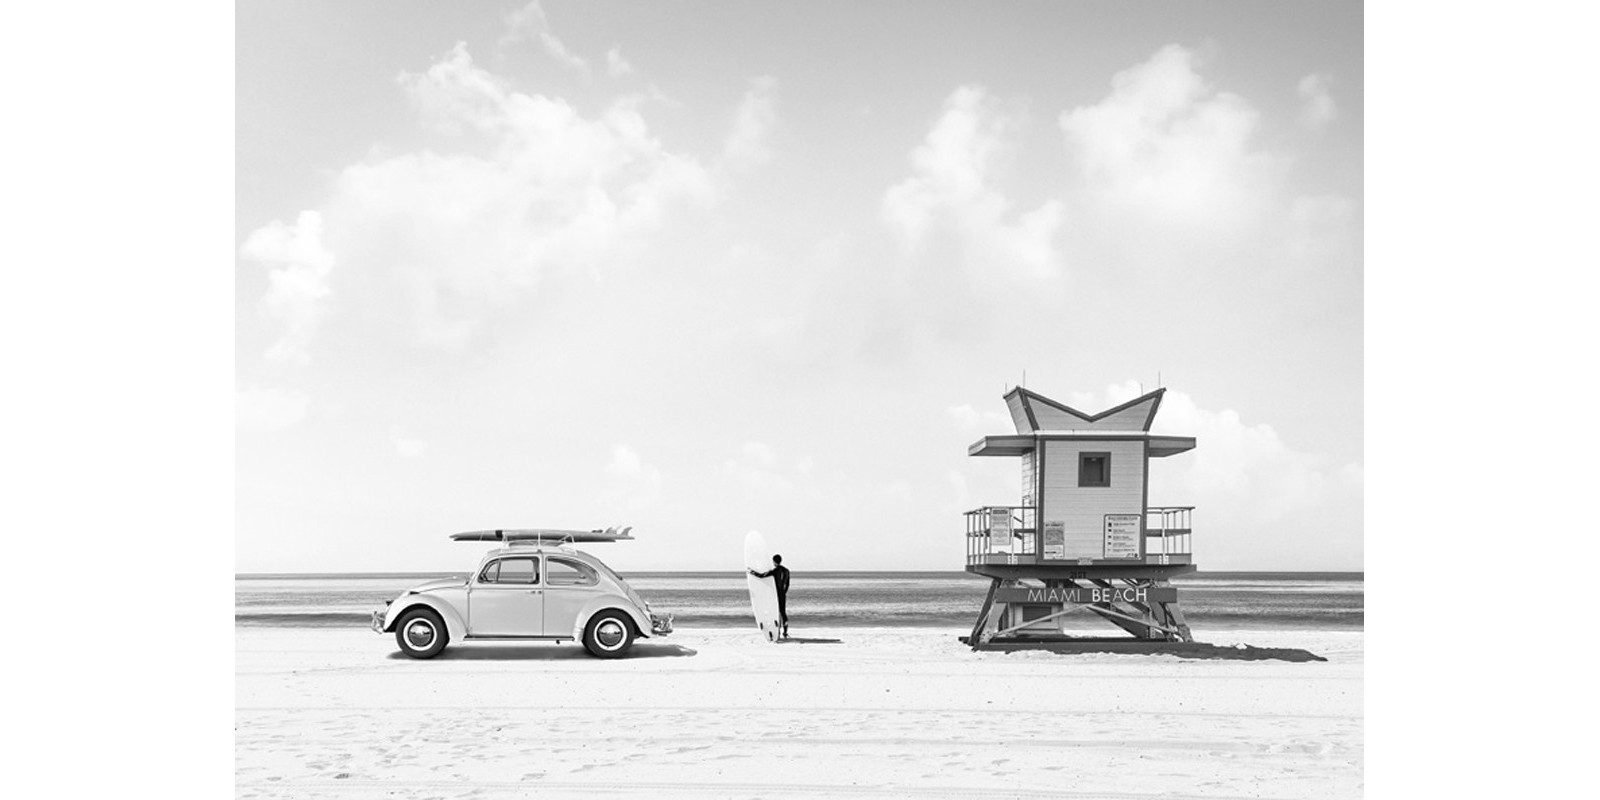 Gasoline Images - Waiting for the Waves, Miami Beach (BW)